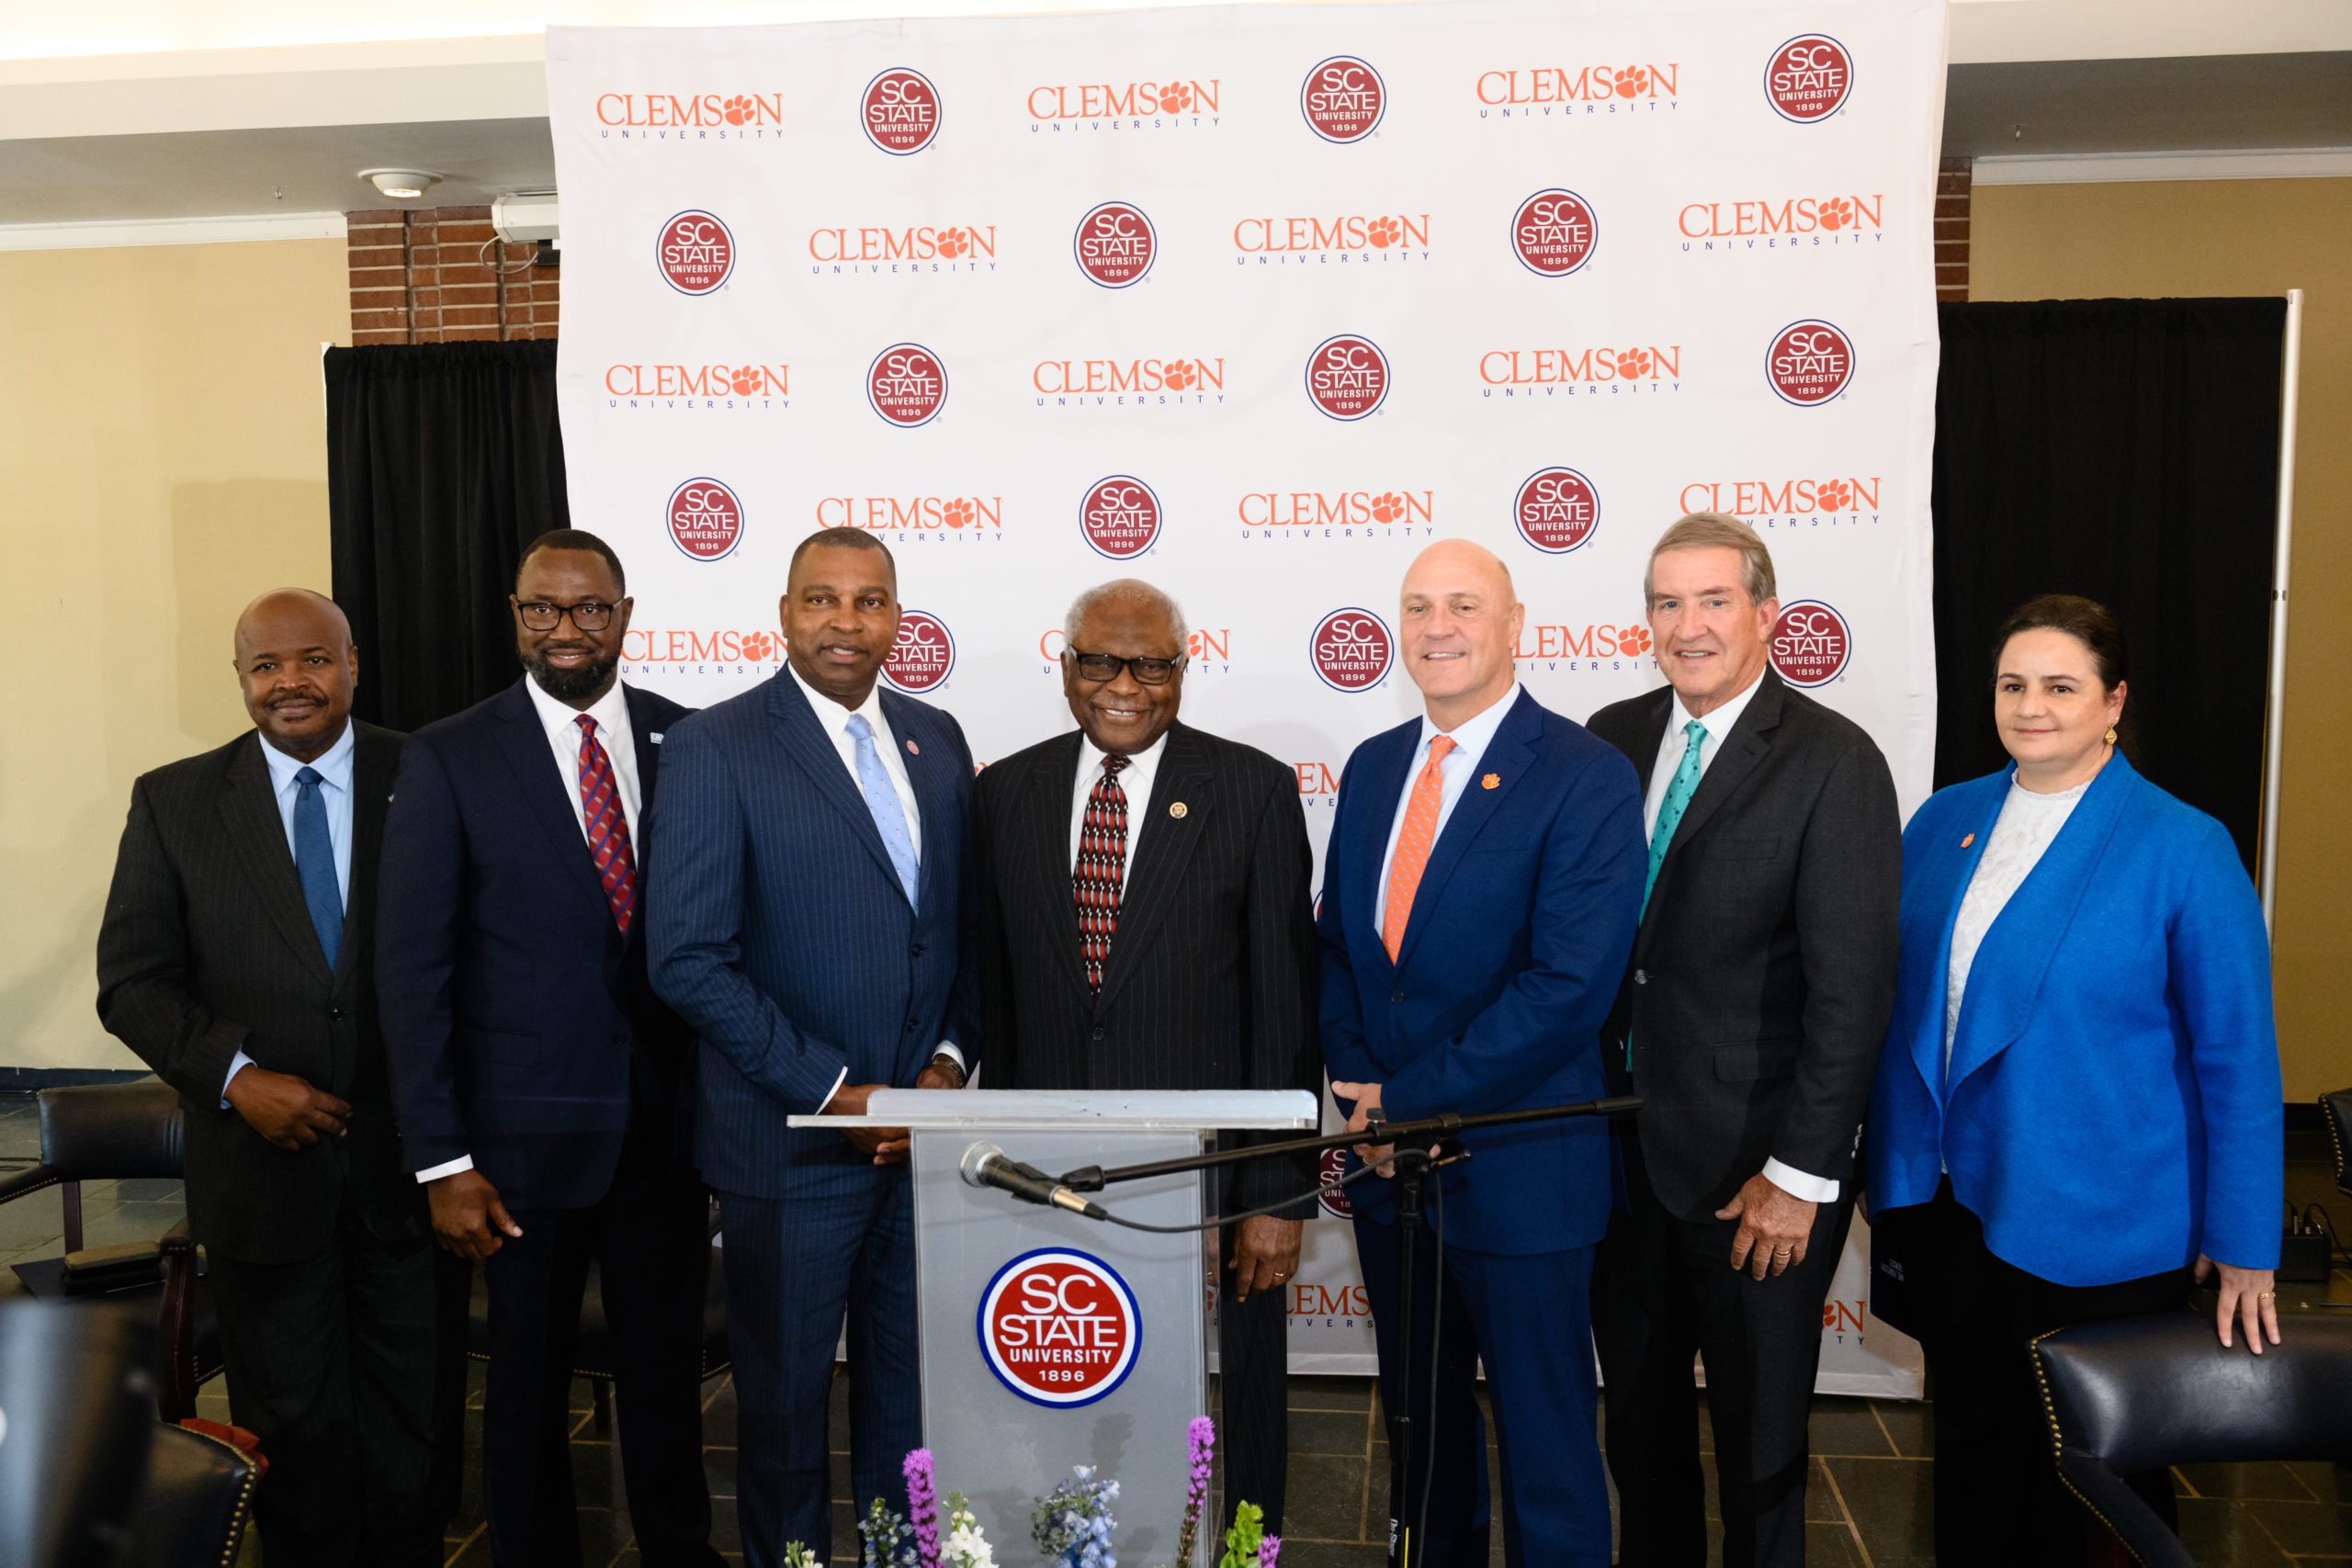 Dignitaries from South Carolina State University, Clemson University, the state of South Carolina and U.S. Congress stand in front of a banner with Clemson and S.C. State logos